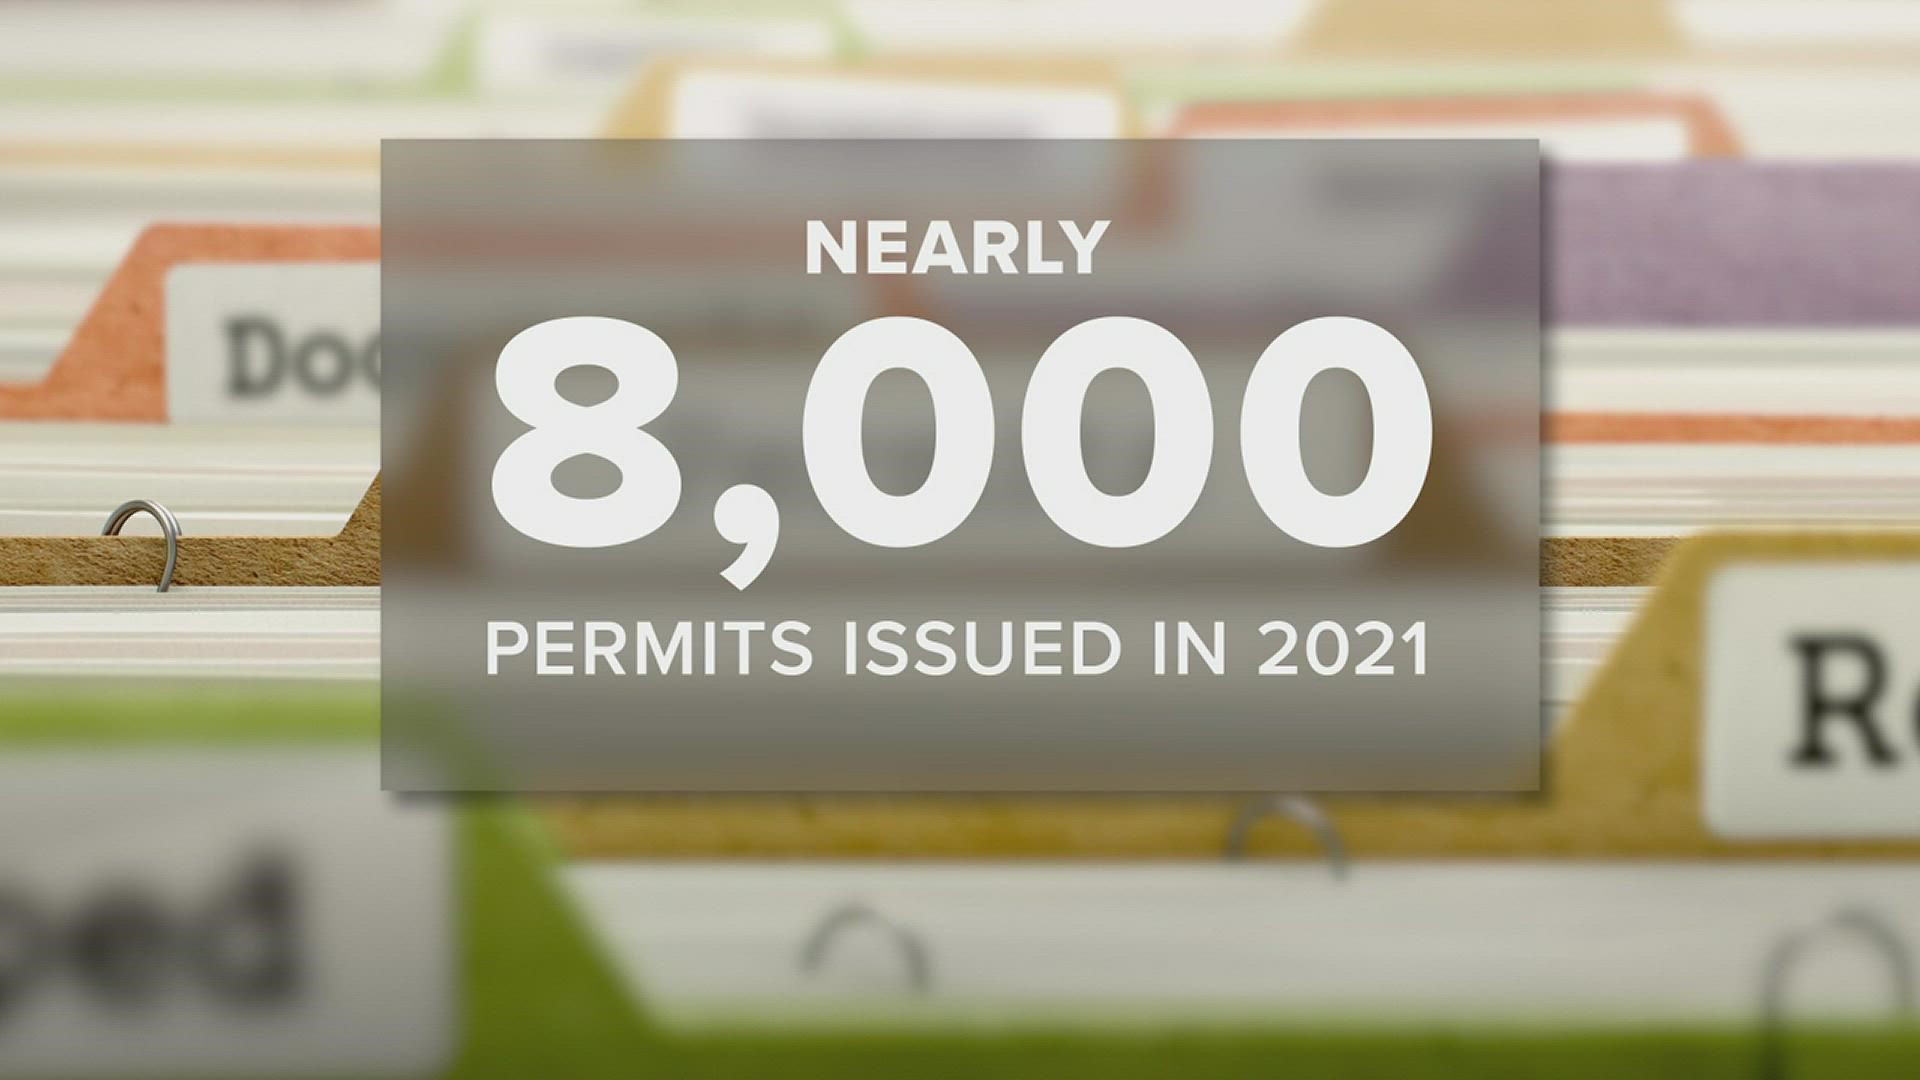 Beaumont has seen a 160% increase in new commercial permits, and a 194% increase in new residential permits.